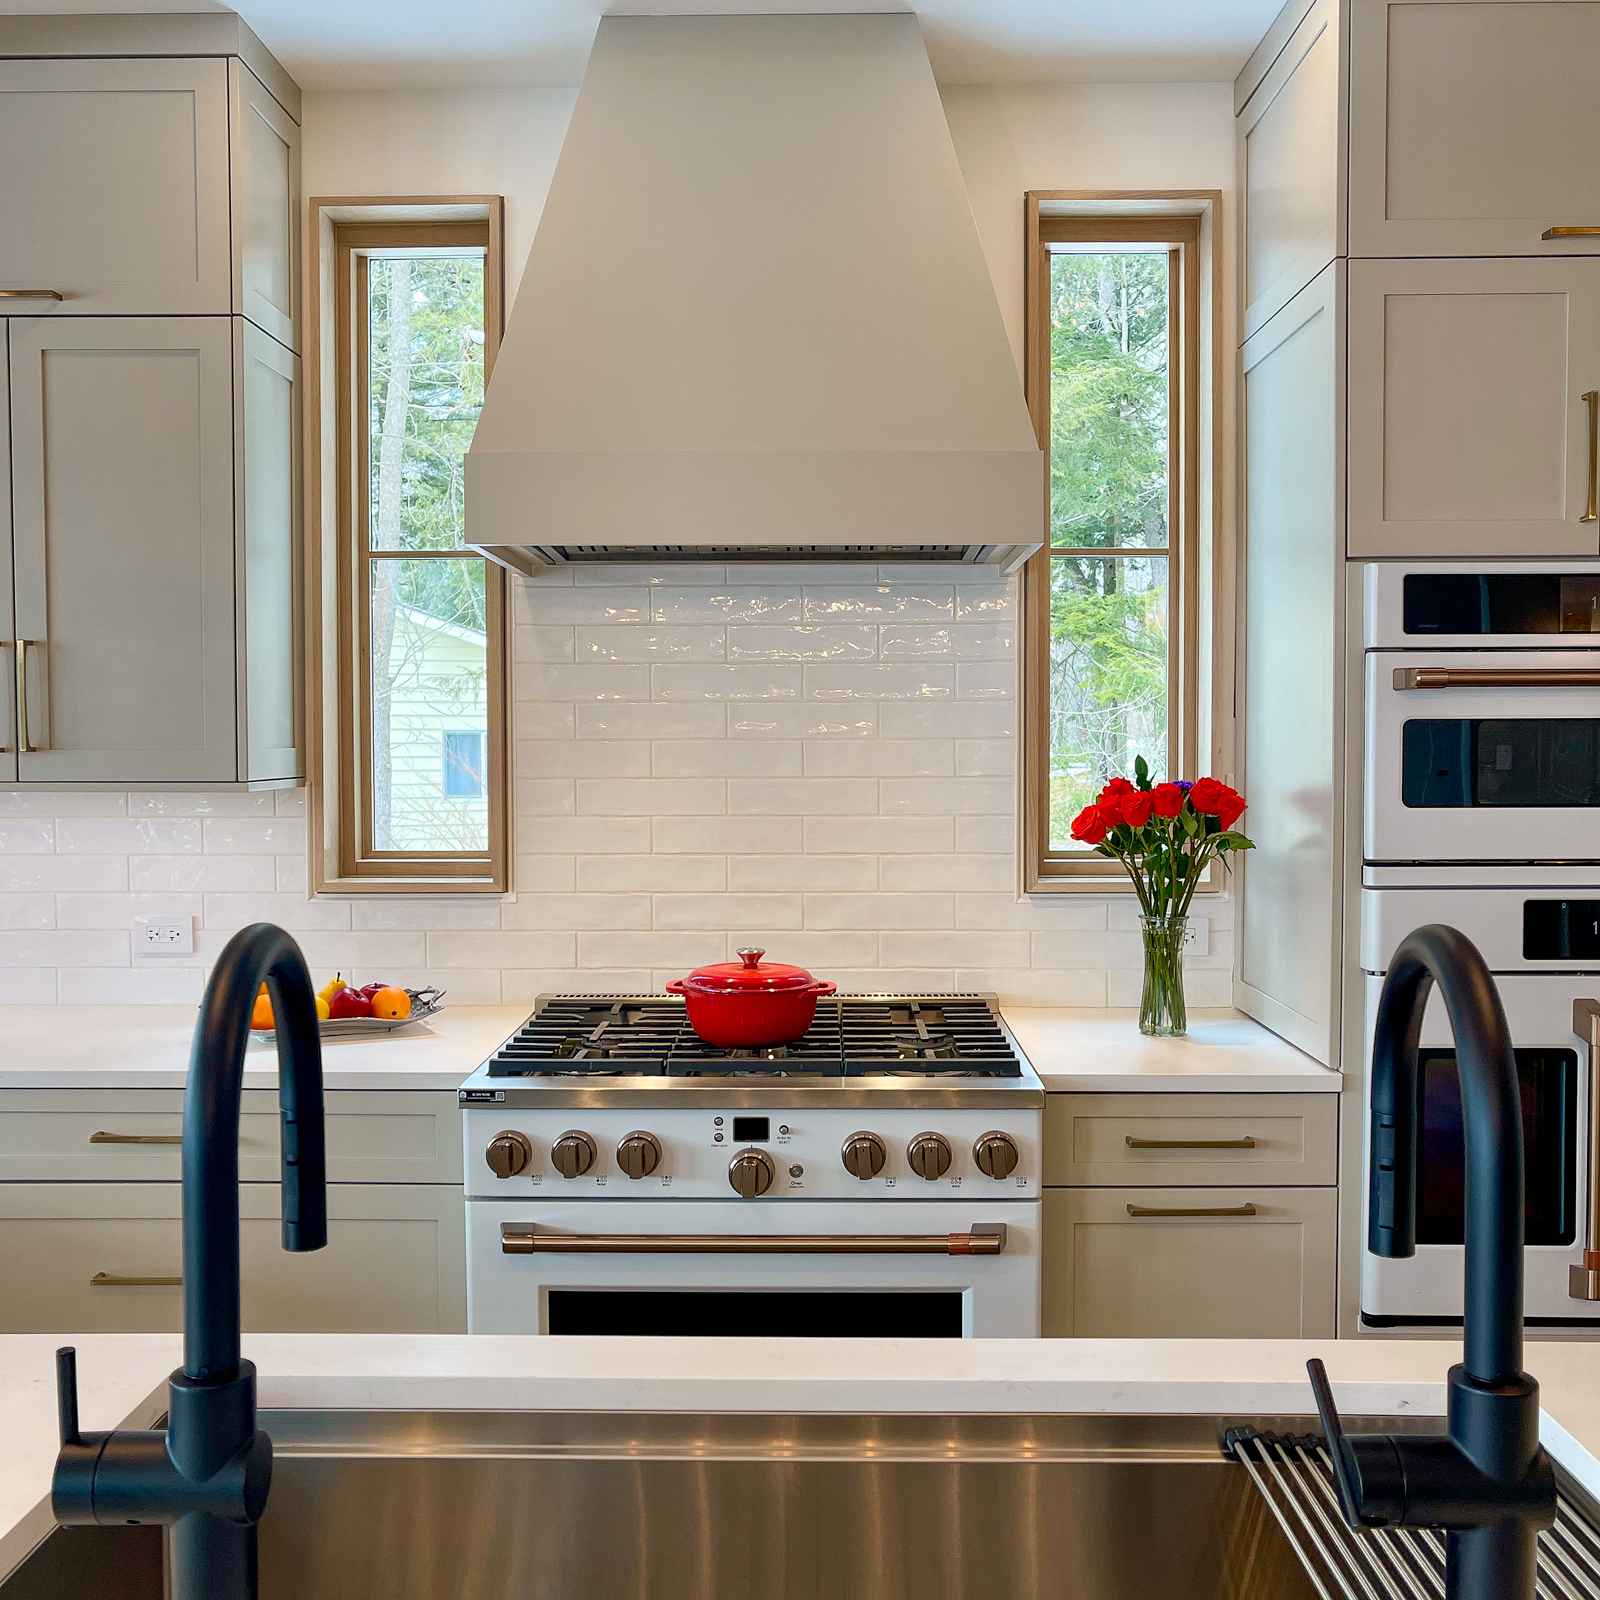 The cabinetry of the kitchen was meticulously desinged and placed around the ceiling beams, custom hood, and viewing windows that book end the range. 